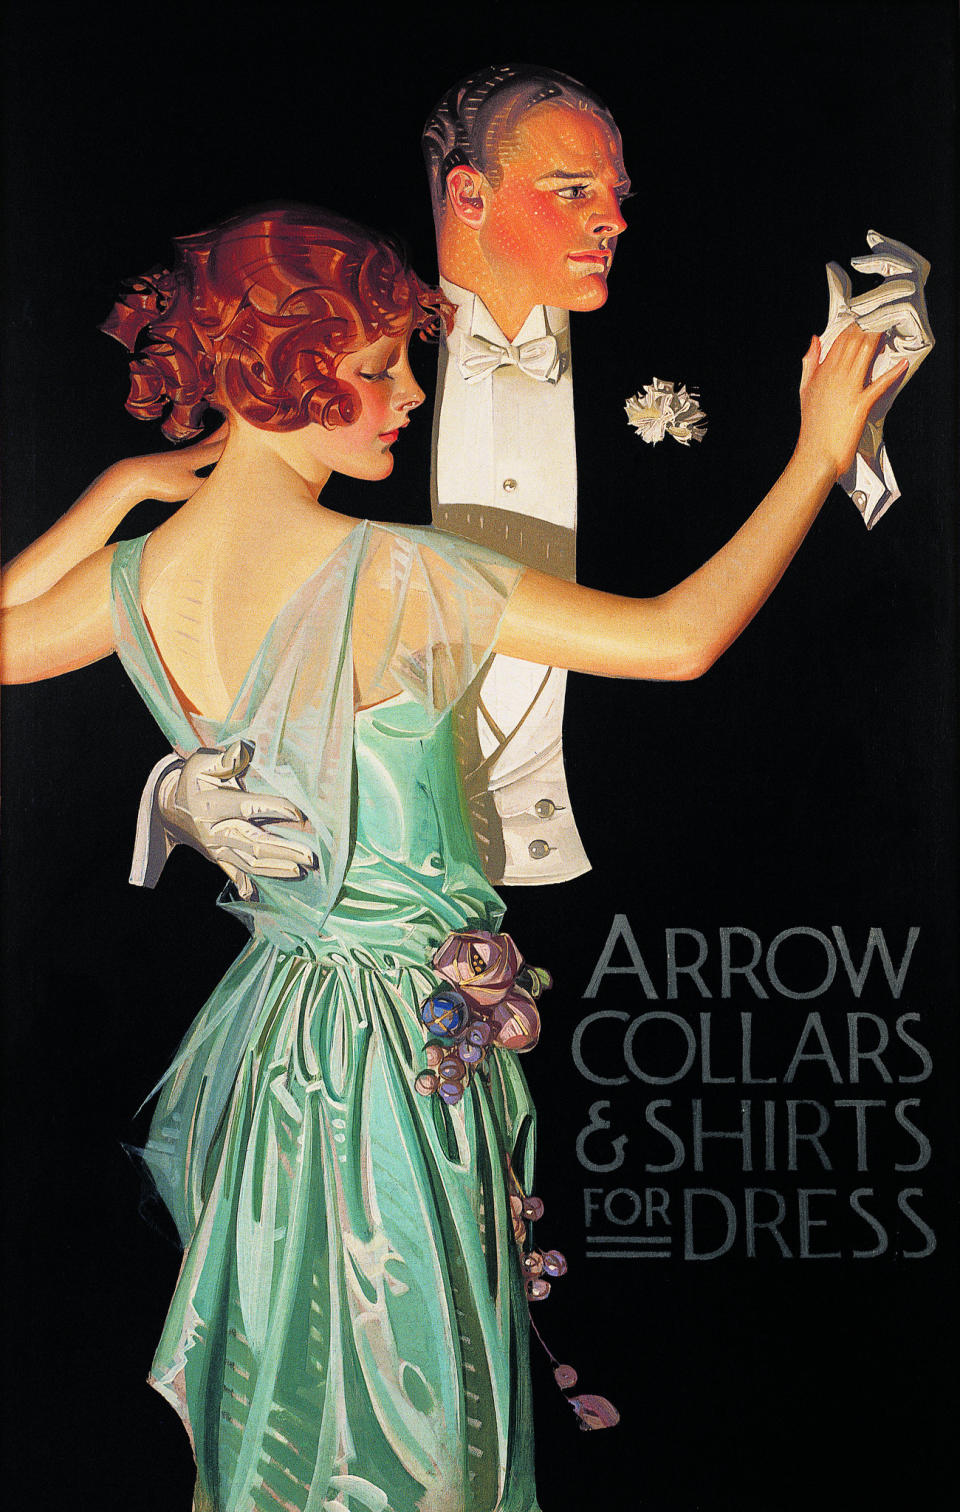 "Man and Woman Dancing" 1923 illustration for Arrow Collars and Shirts advertisement.